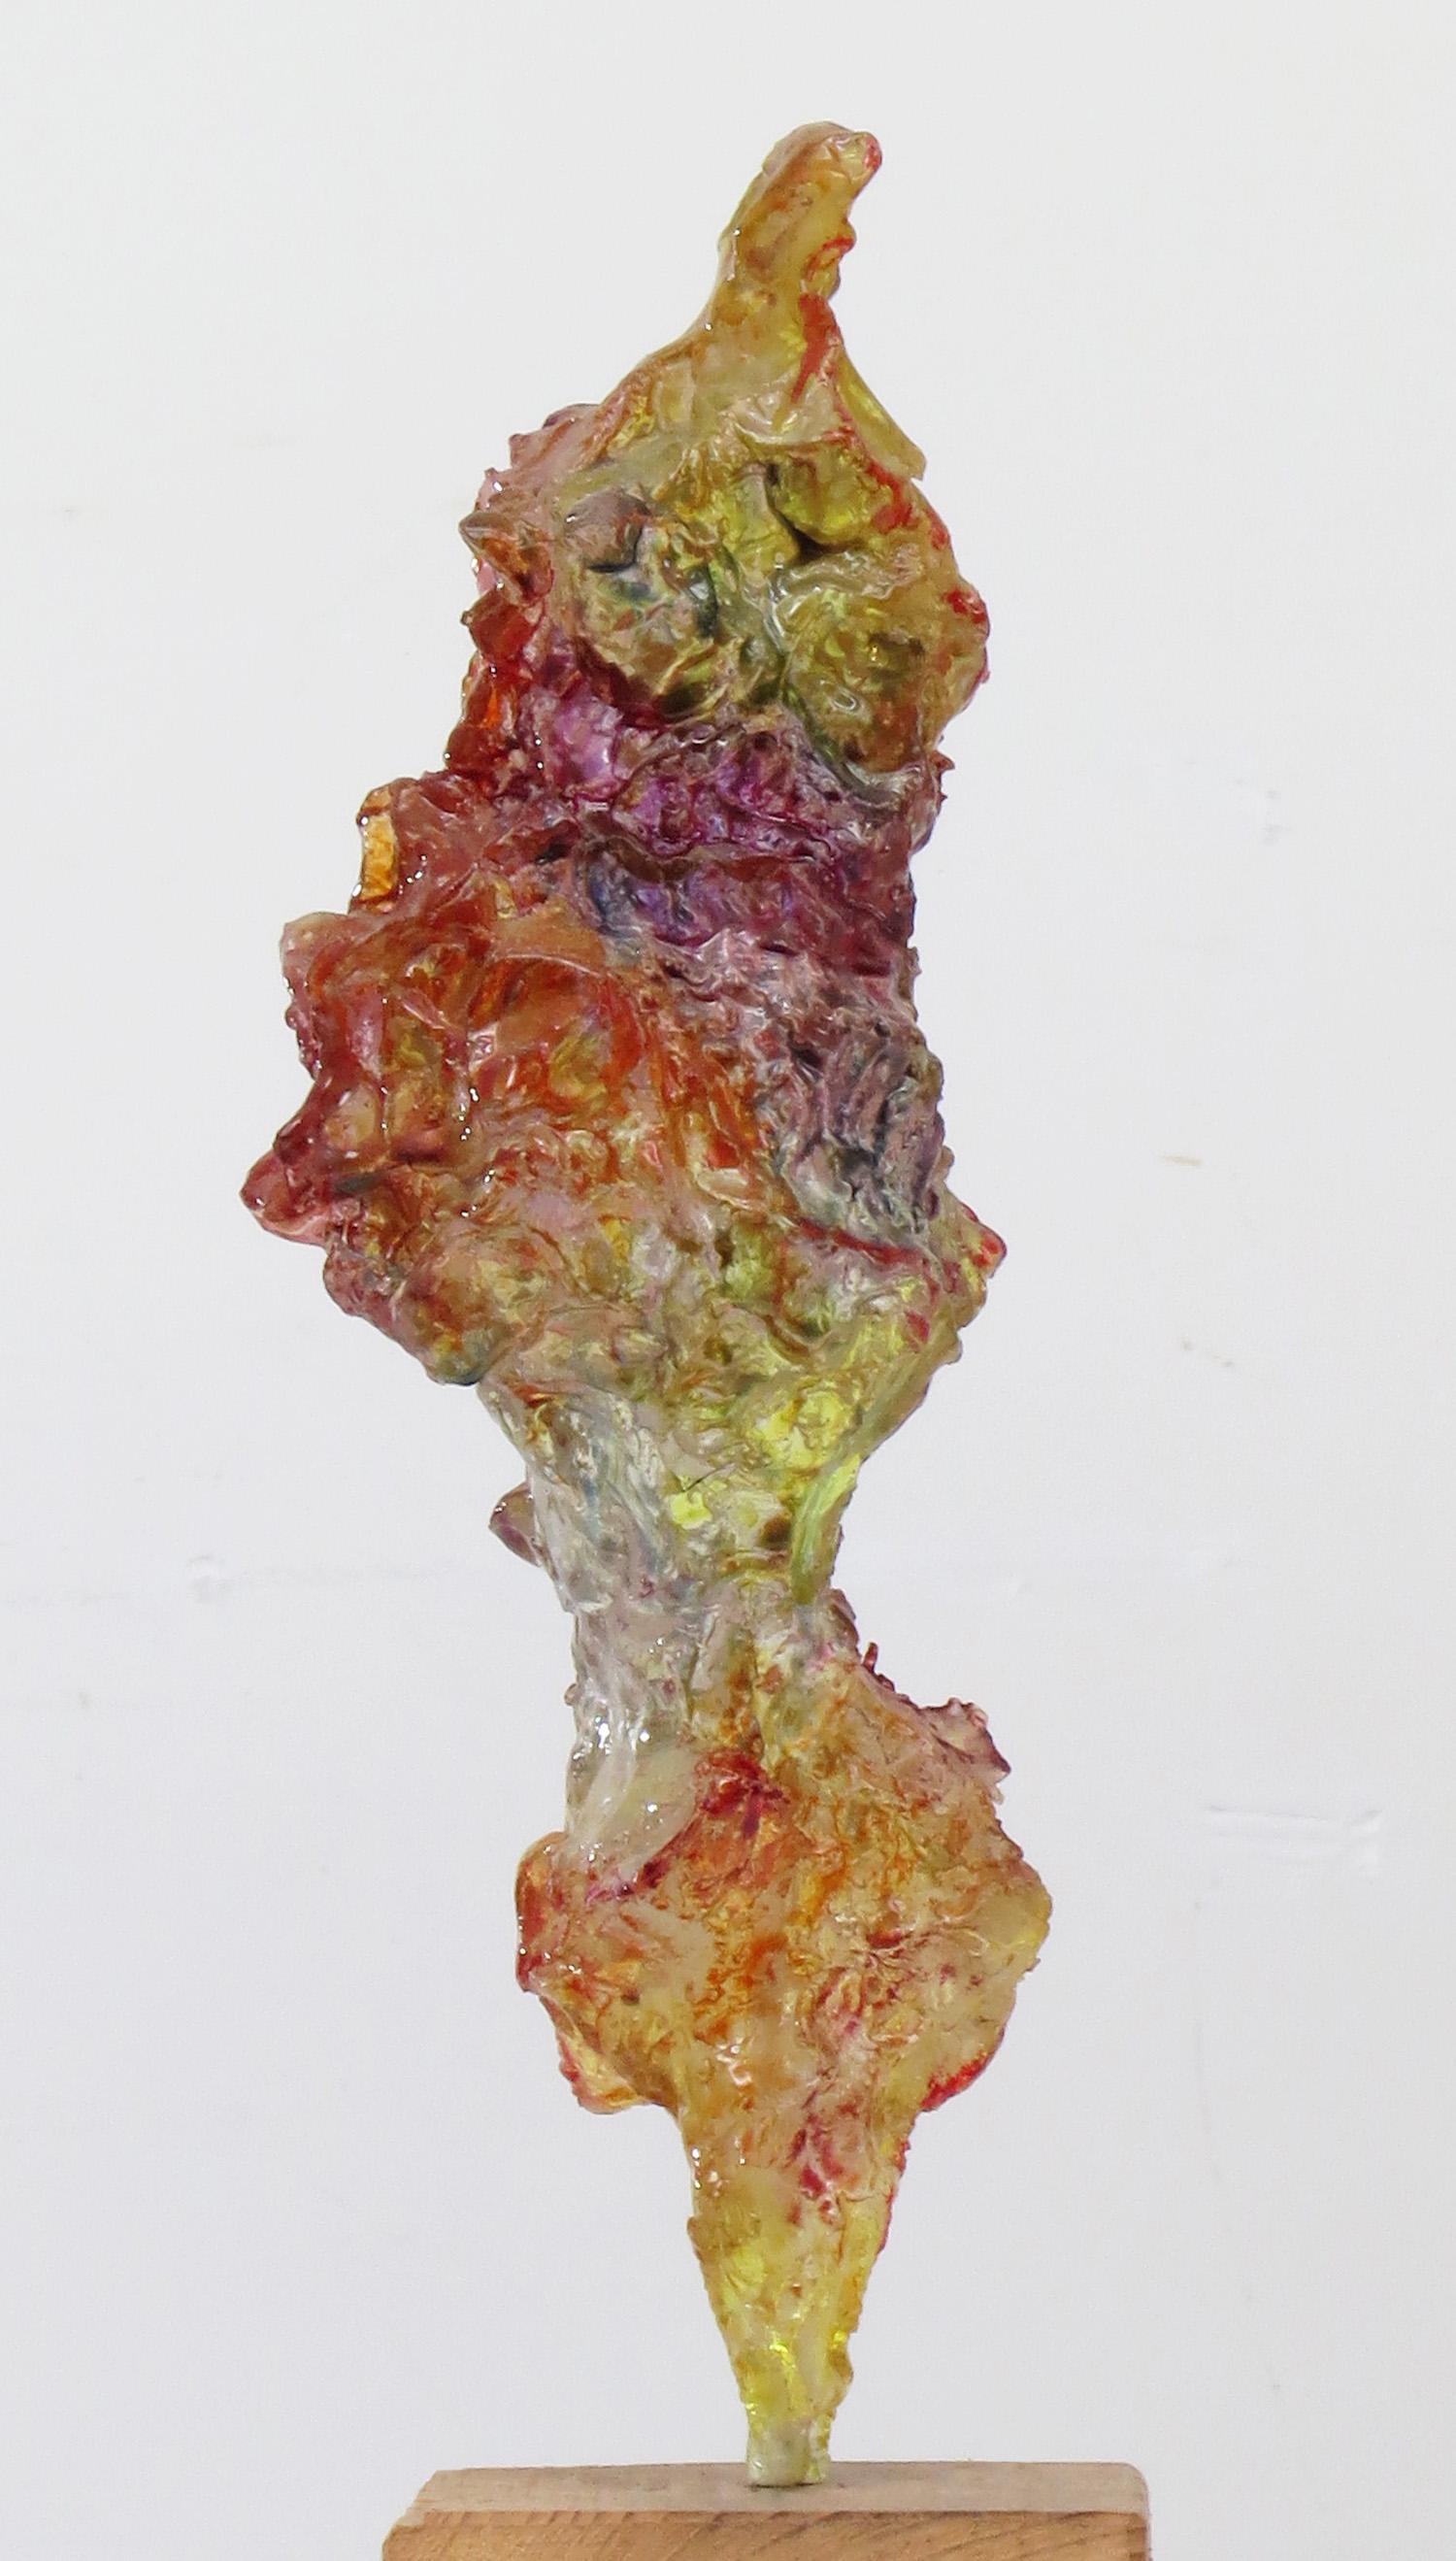 Howard Kalish Abstract Sculpture - "Shell Dance 8", translucent mineral crystal glows in yellow, red and violet